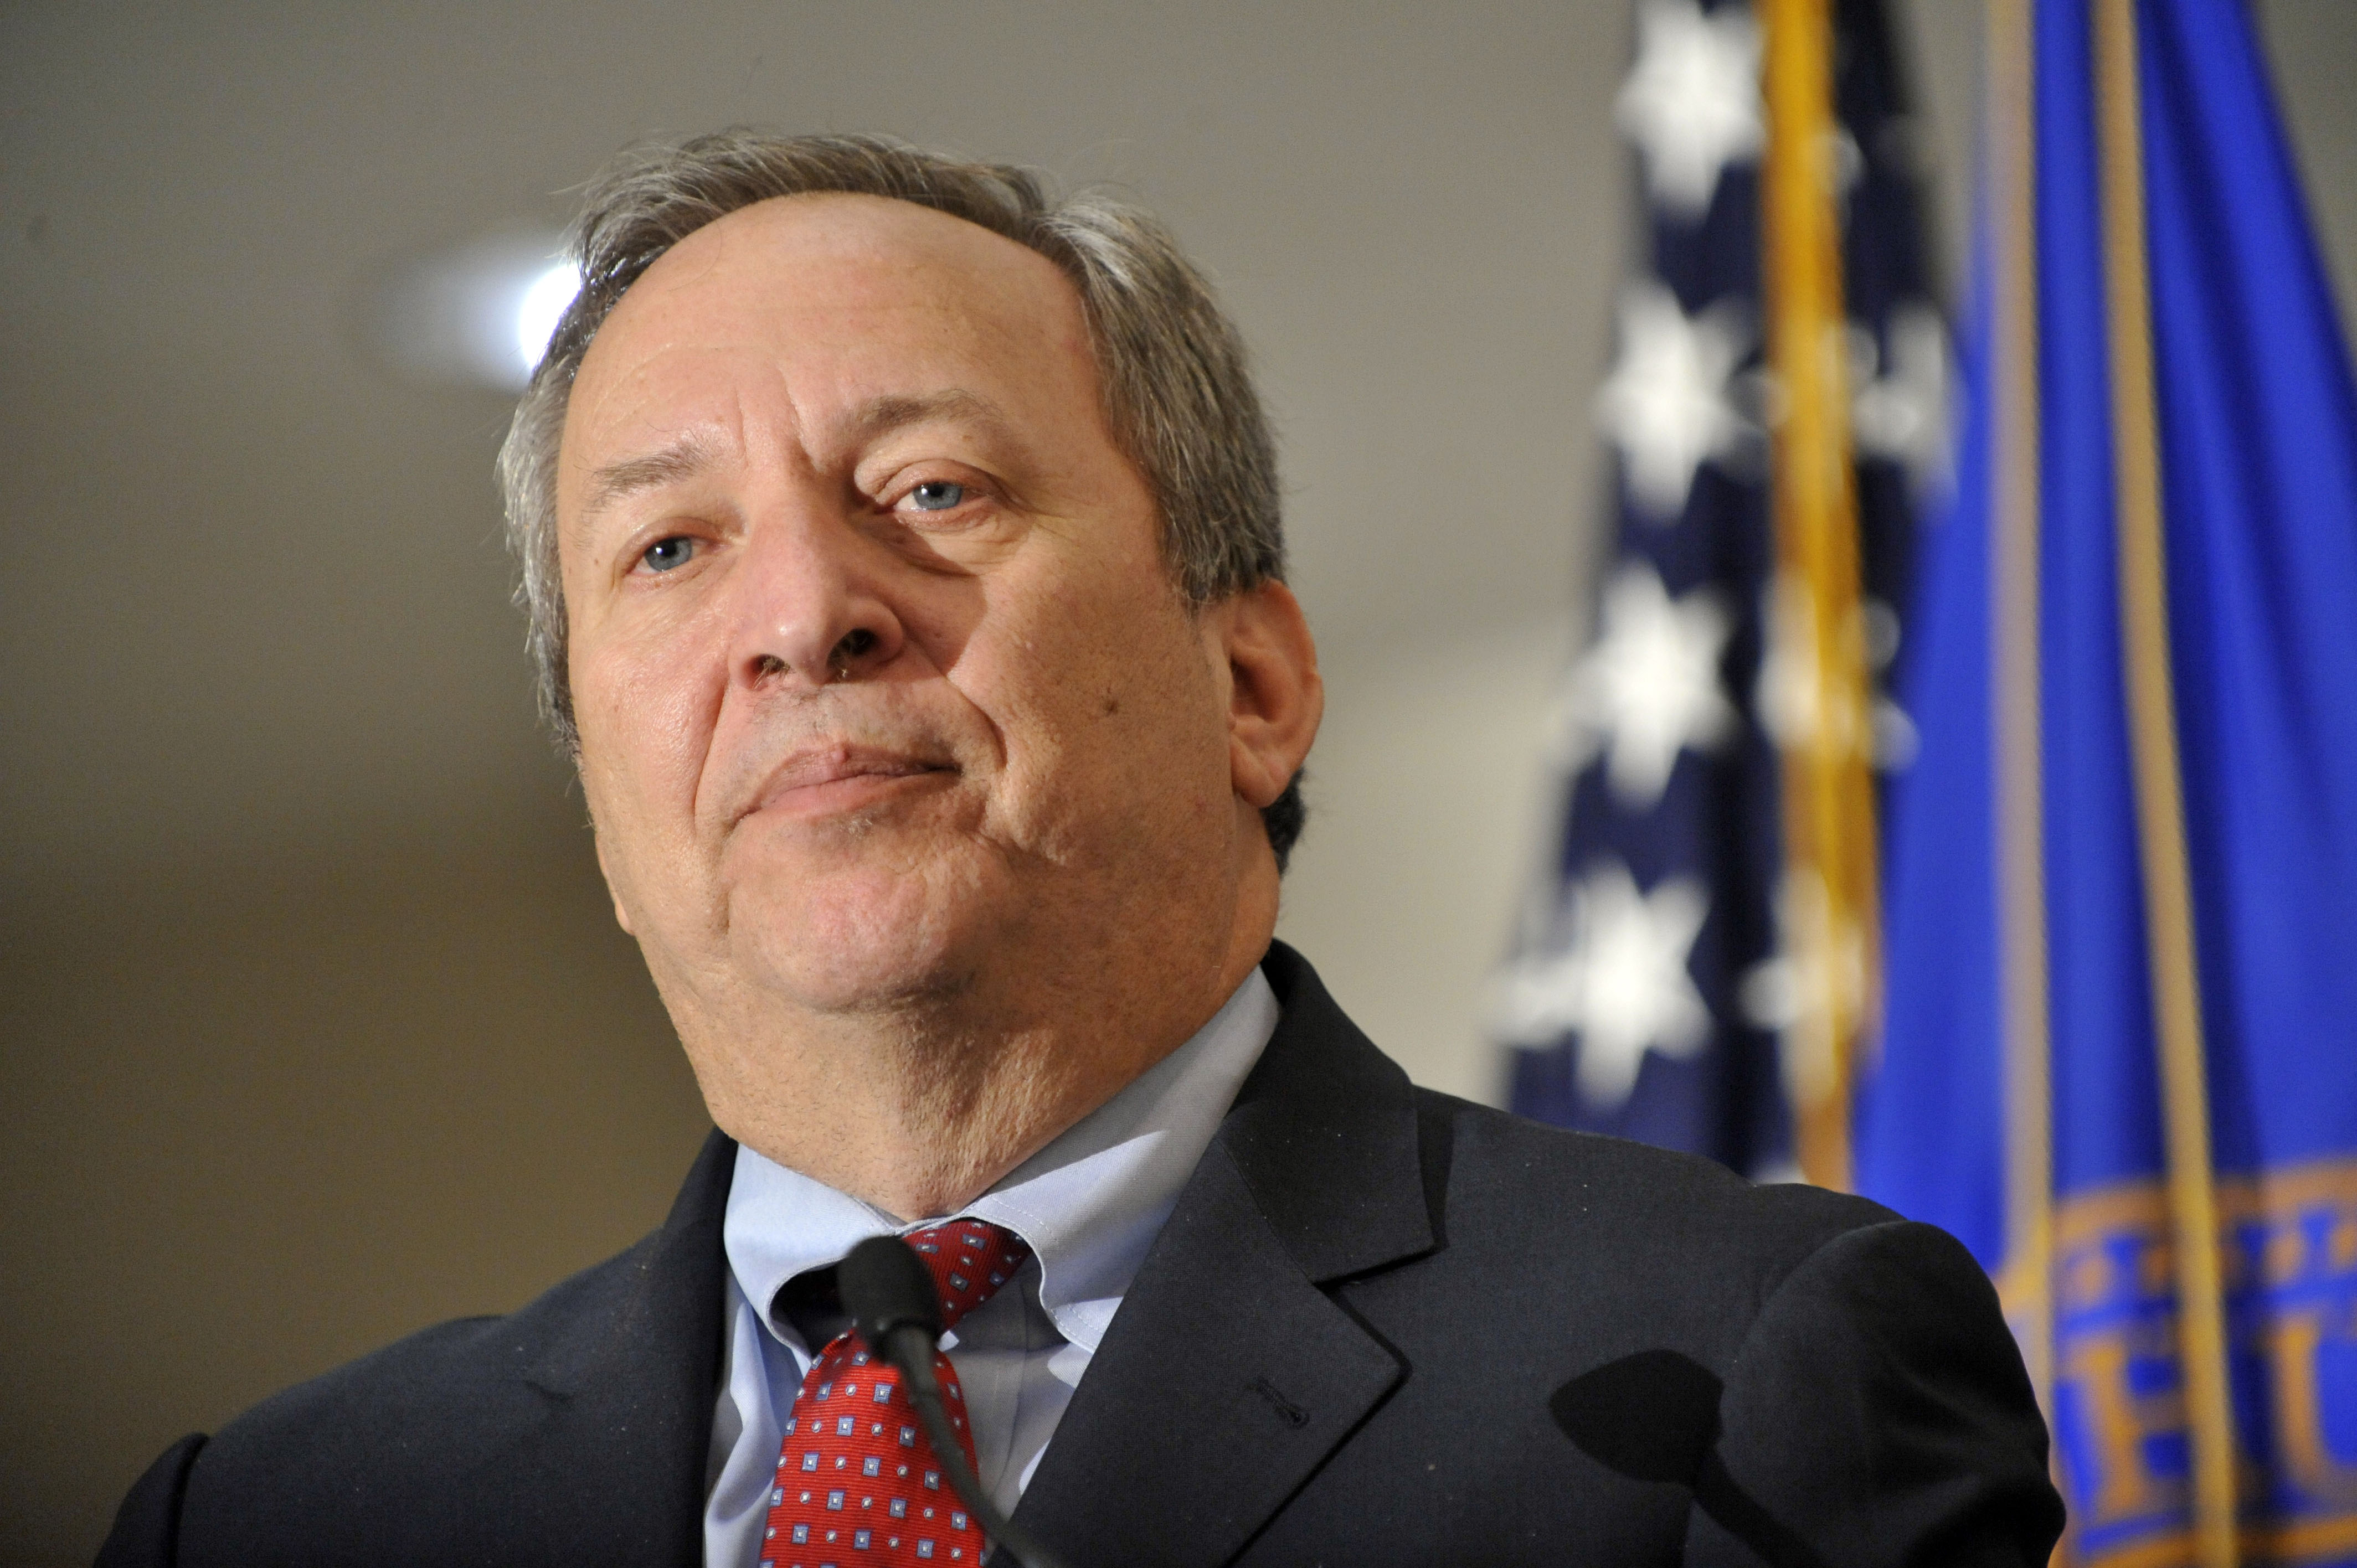 Larry Summers, an economist stepping down as down as director of President Obama's National Economic Council, speaks on increasing the use of information technology in health care in a press conference at the Department of Health and Human Services on Dec. 8, 2010. (Jay Mallin—Zuma Press/Corbis)